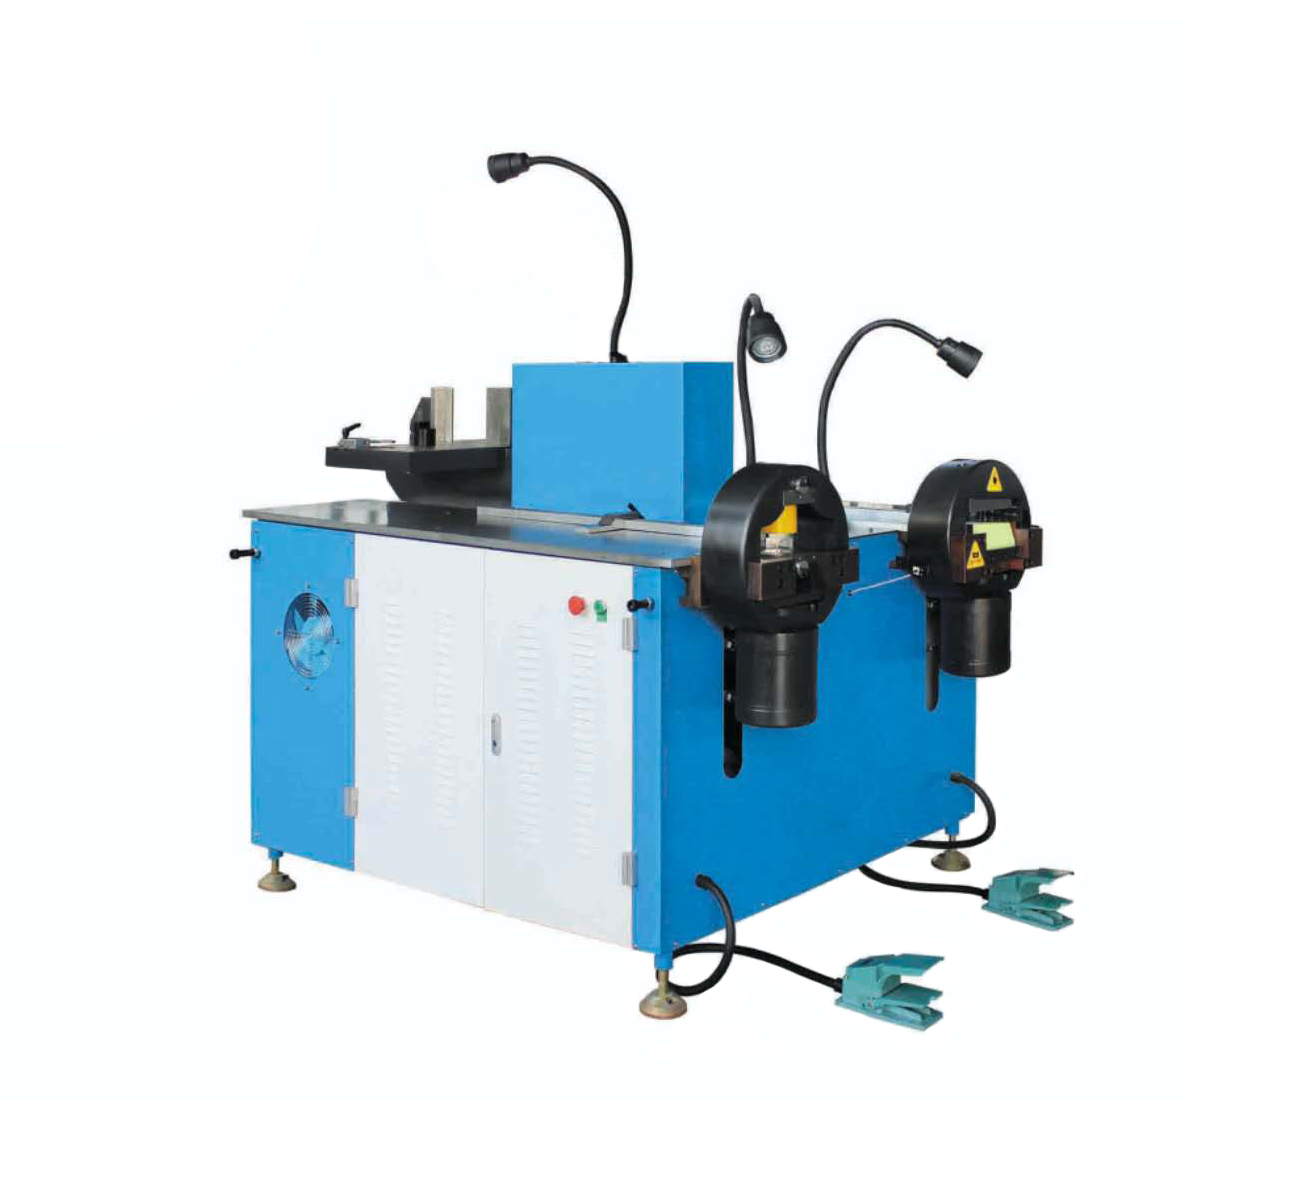 China Wholesale Busbar Machine Factories - Good Quality China Factory Sale Various Multi-Function Machine Press Briqueting Hydraulic Scrap Metal Used Car Baler for Sale  – Gaoji